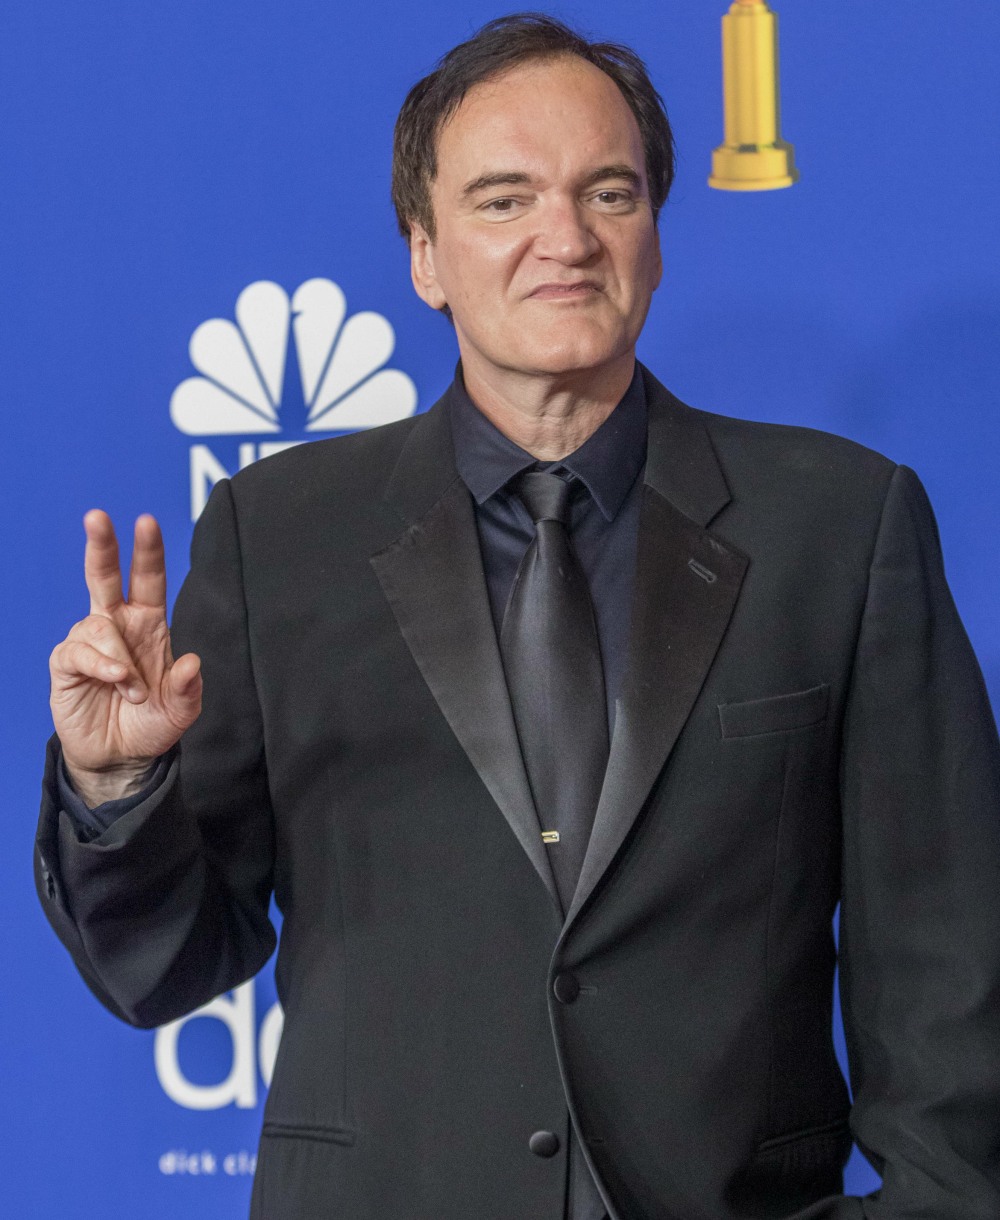 Quentin Tarantino poses in the press room of the 77th Annual Golden Globe Awards, Golden Globes, at Hotel Beverly Hilton in Beverly Hills, Los Angeles, USA, on 05 January 2020. | usage worldwide